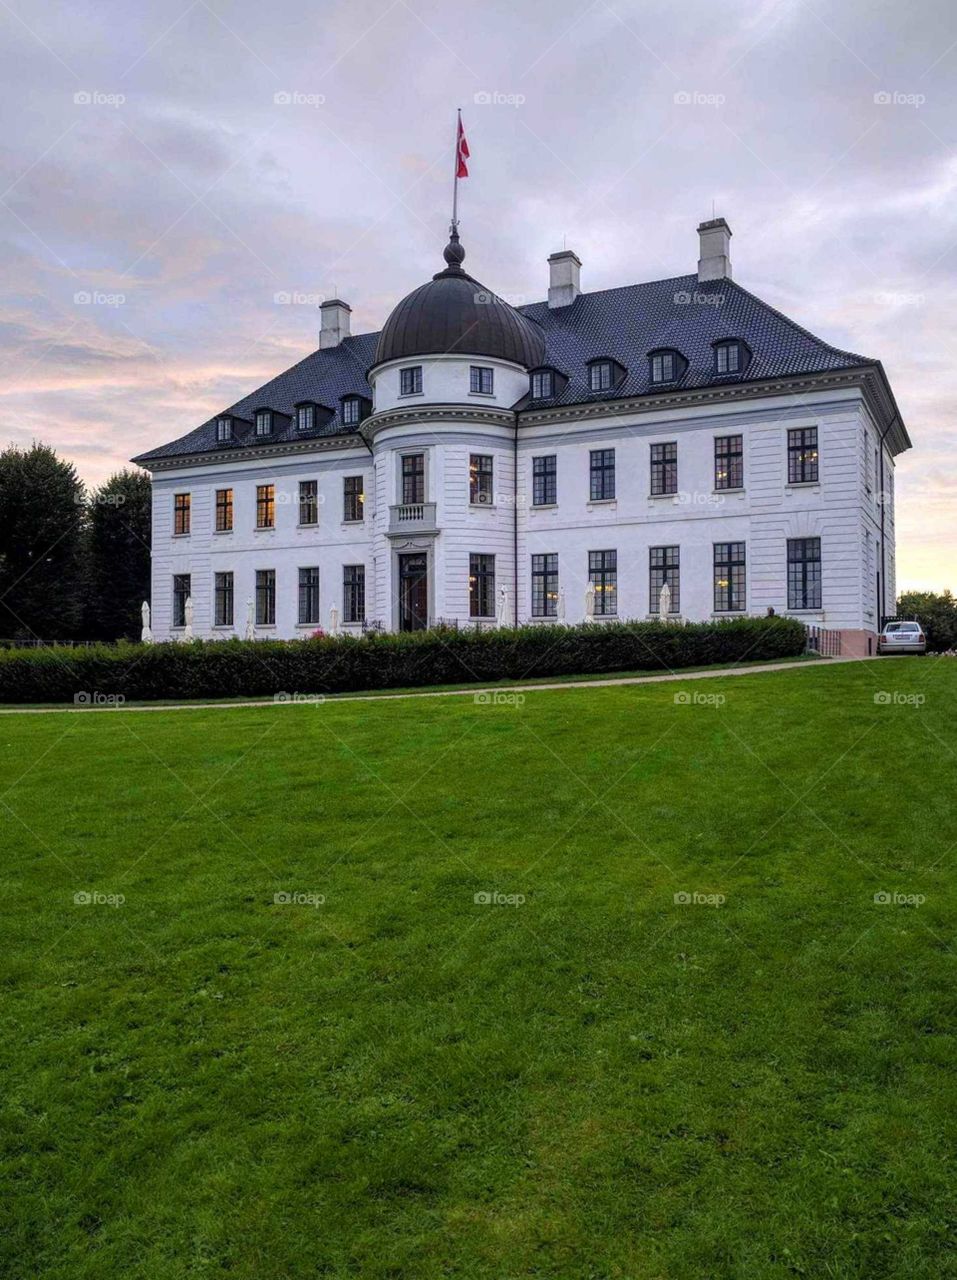 Bernstorff Castle in Gentofte, Denmark. The place functions as a hotel, and houses a lot of events such as weddings, concerts, anniversaries etc.